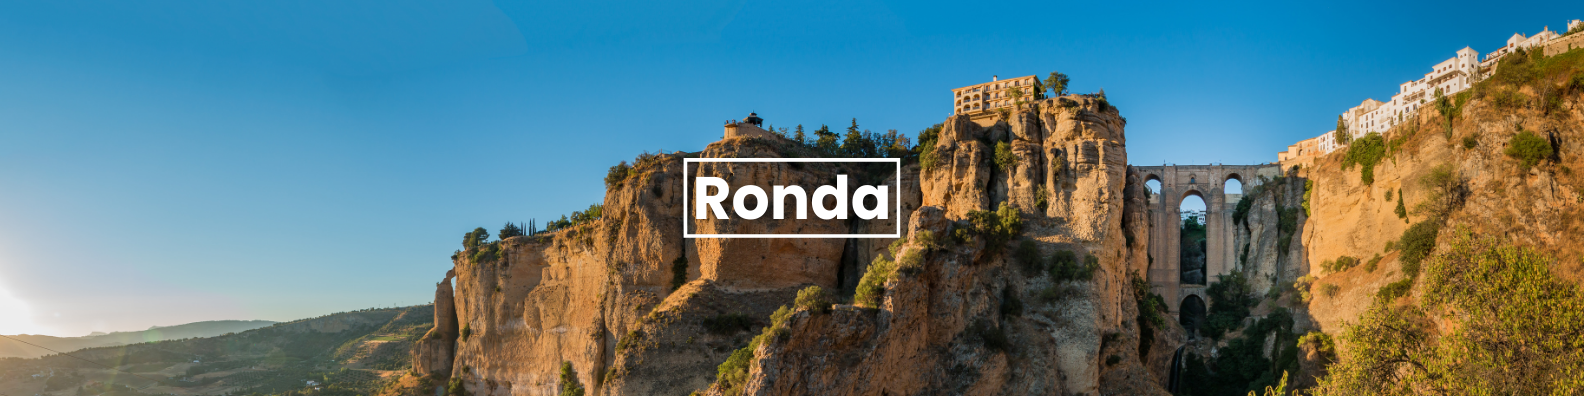 a bridge over a cliff with the word ronda on it . Barter'sTravelnet